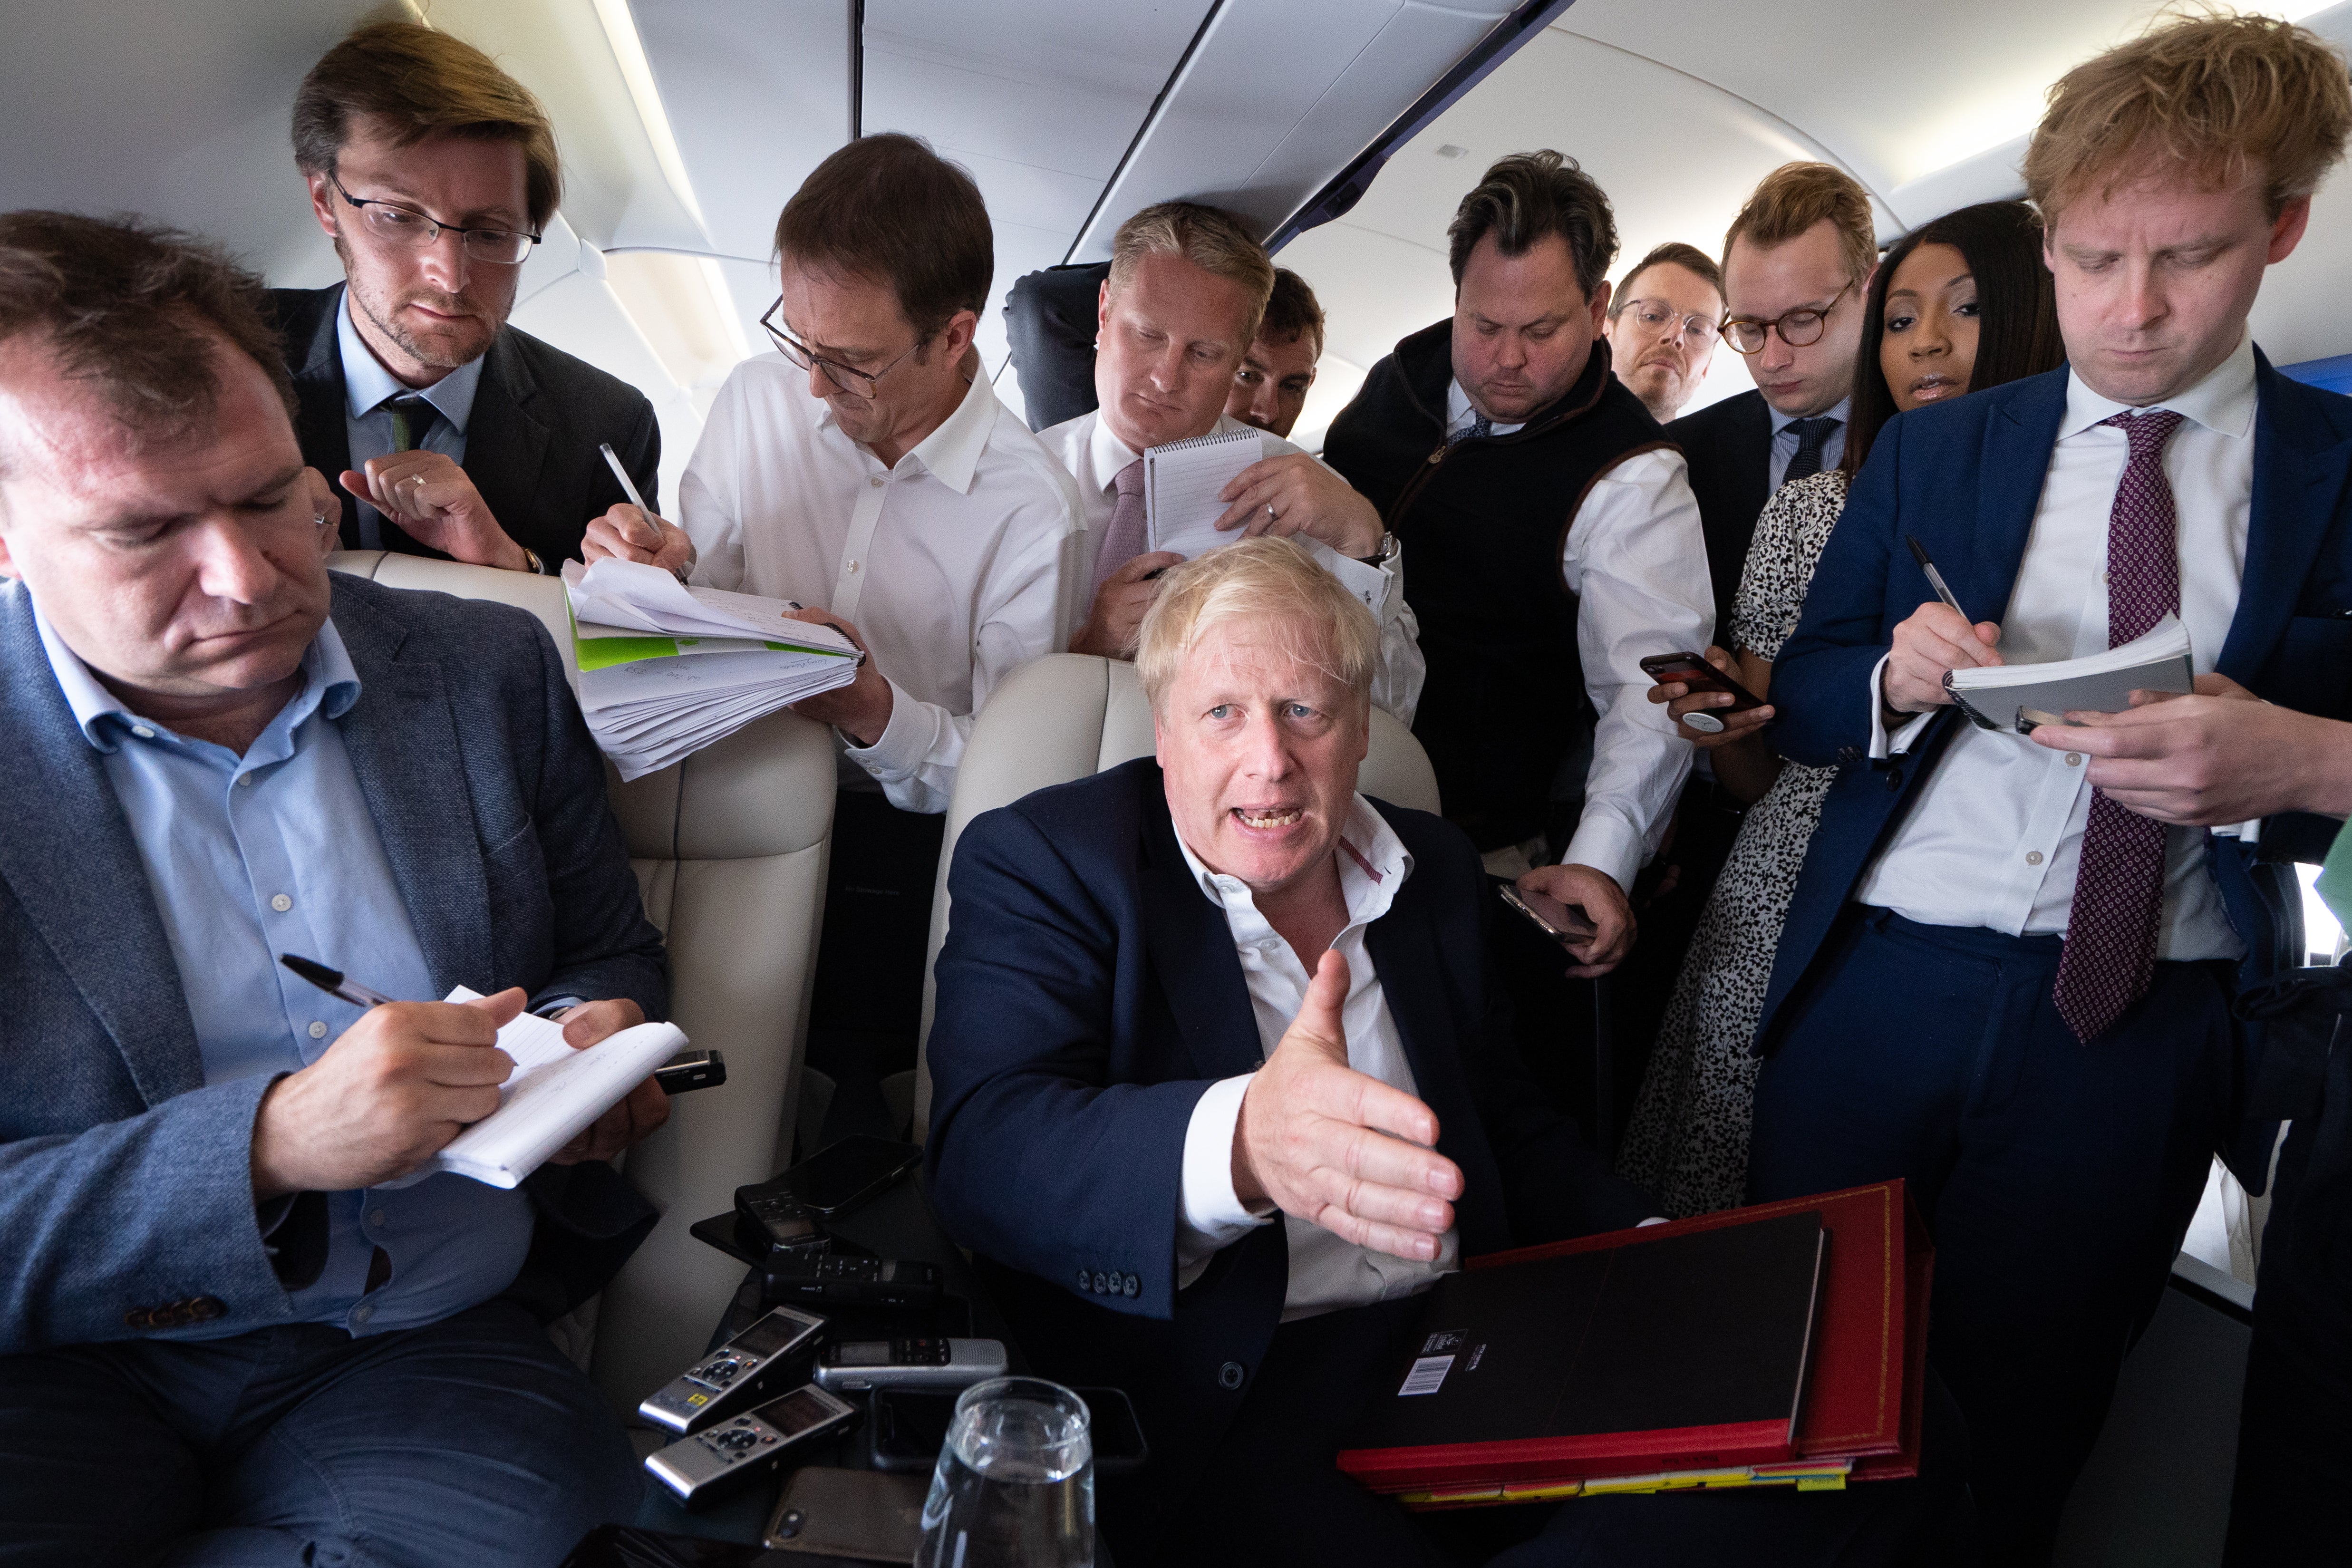 Prime Minister Boris Johnson talks to journalists on his plane during a flight from Germany to the Nato summit in Madrid (Stefan Rousseau/PA)